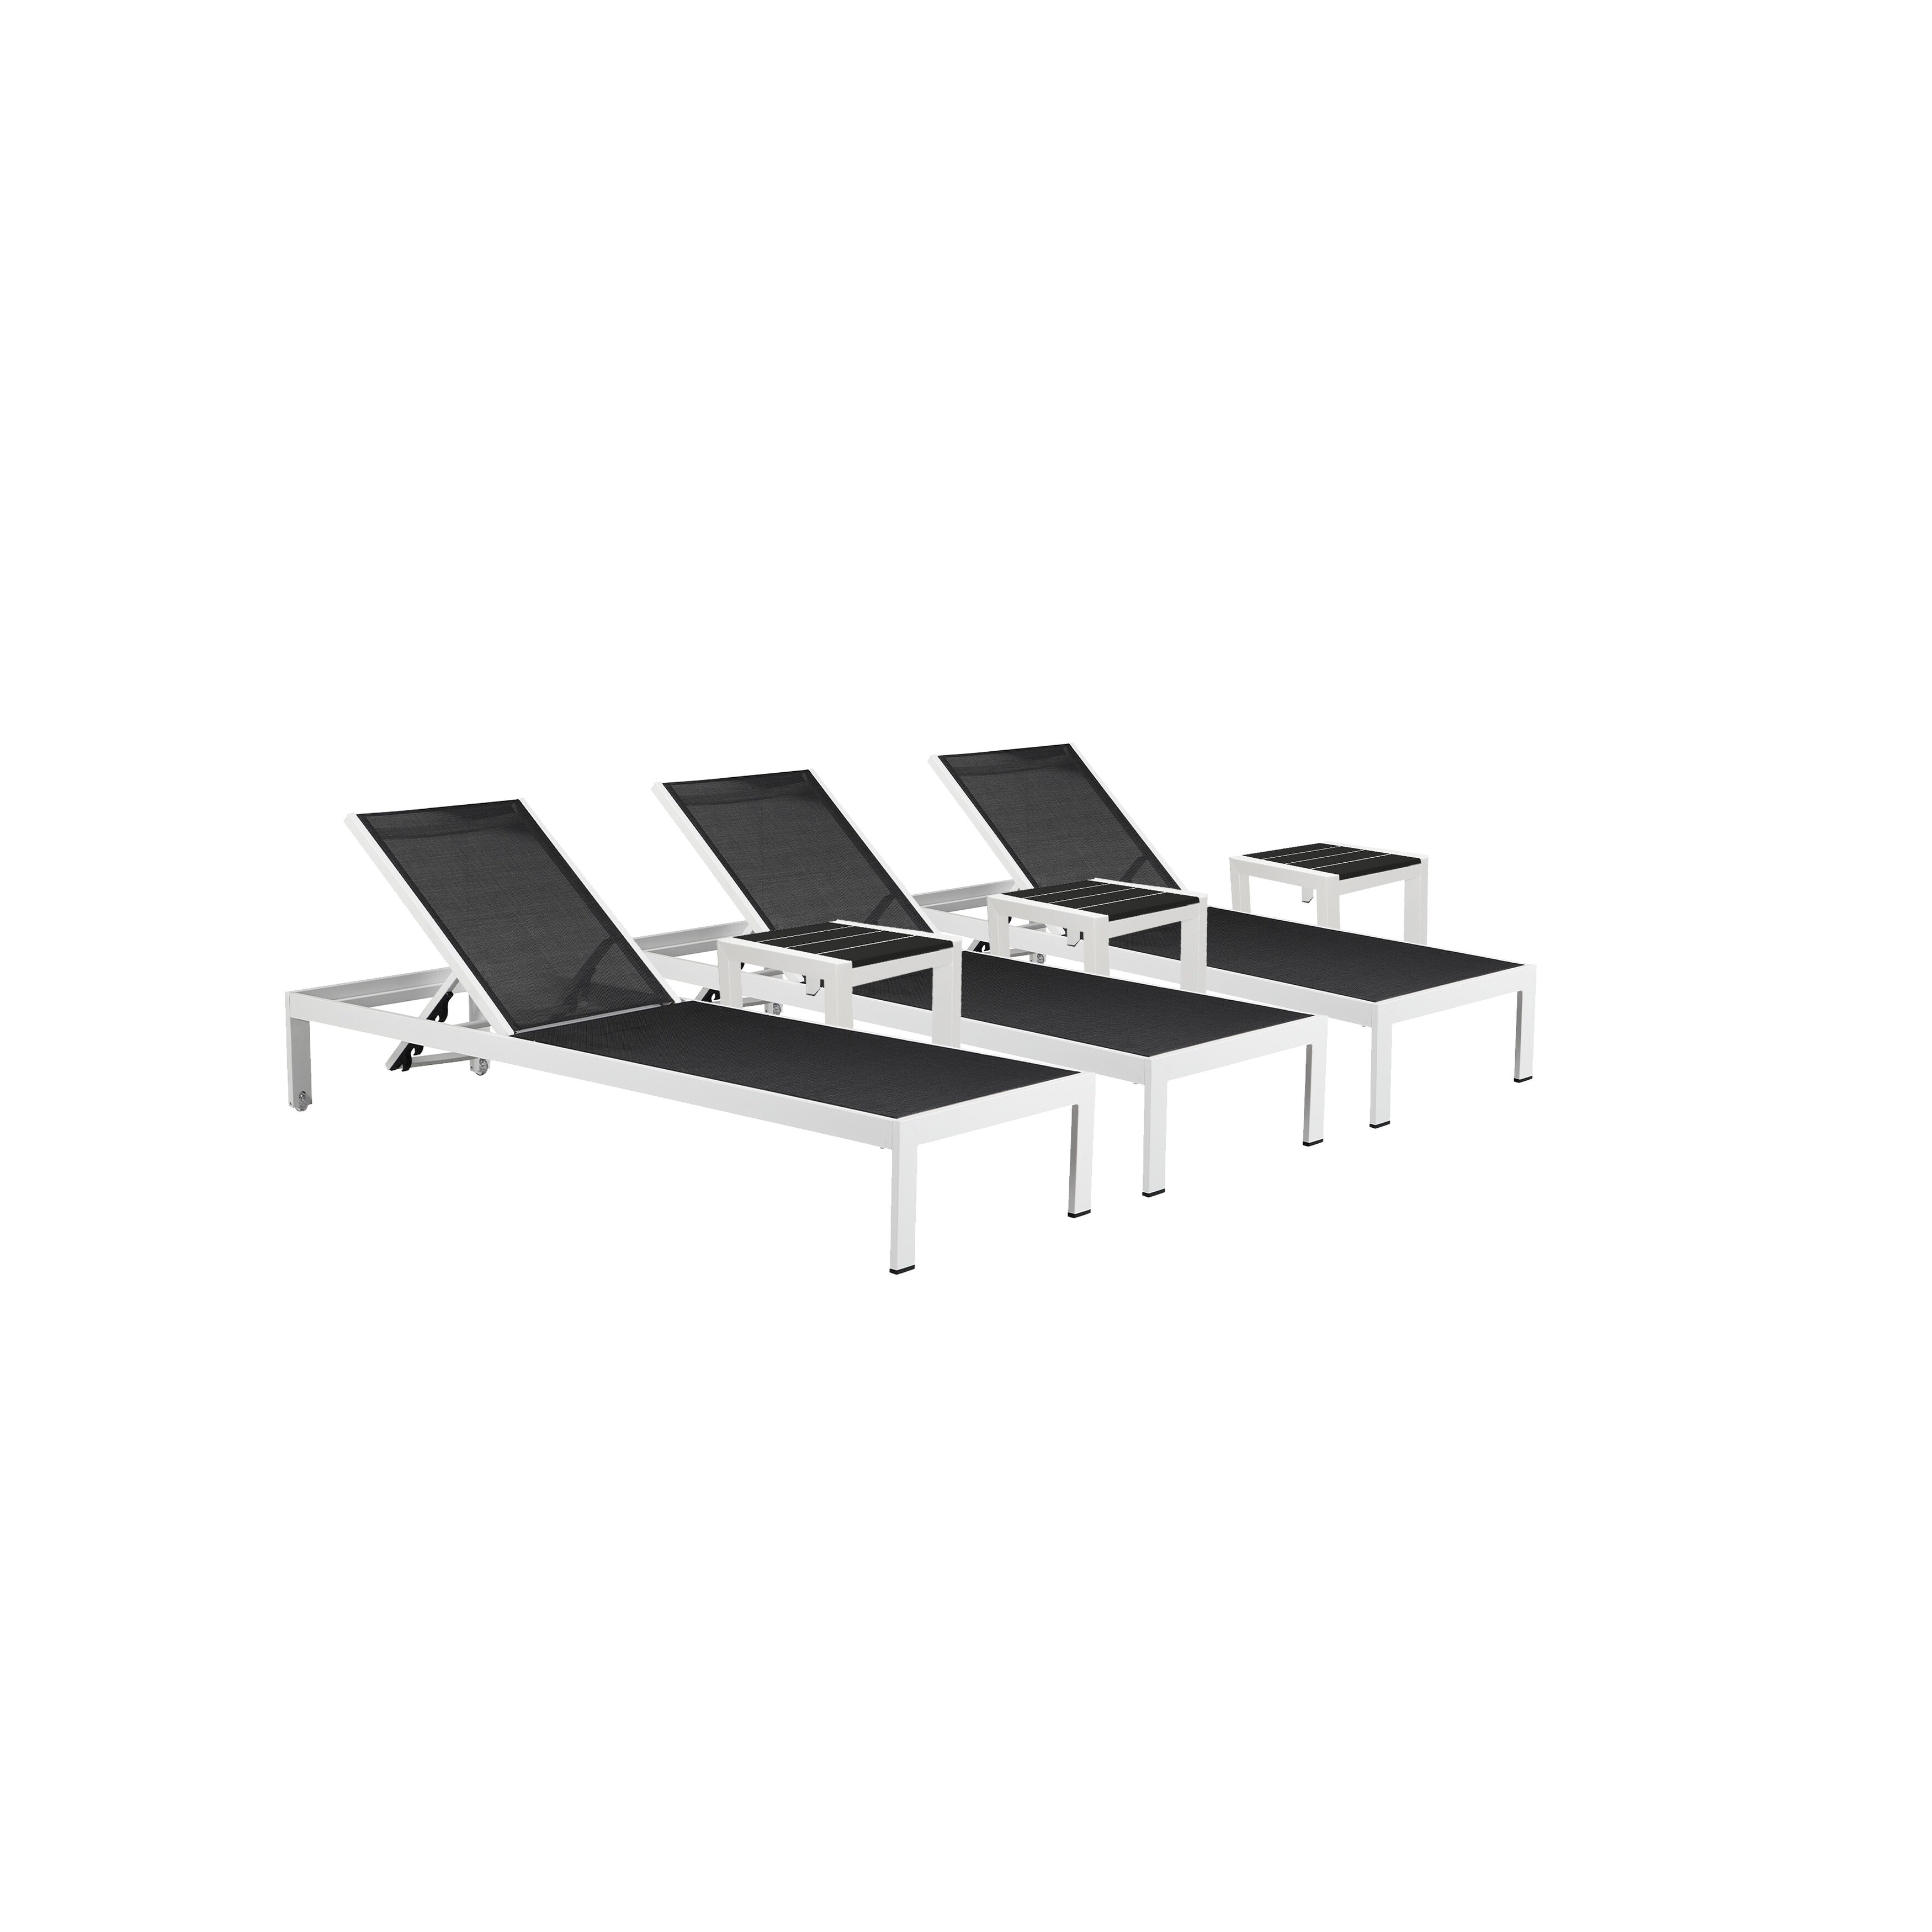 3 Sally Lounger And 3 Side Tables